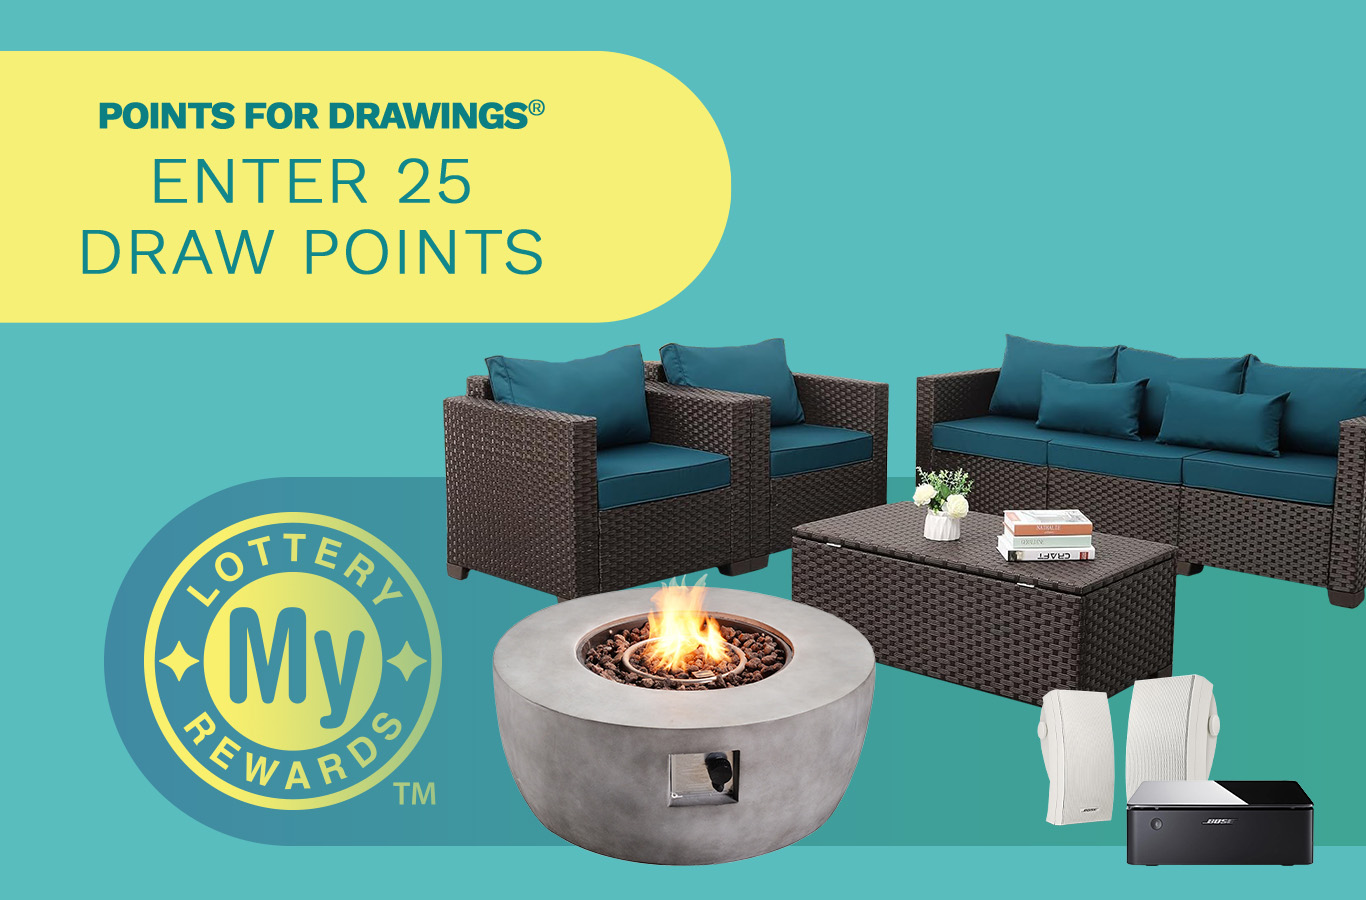 Here's your chance to win a Patio Living Set! Enter by Monday, May 20th.